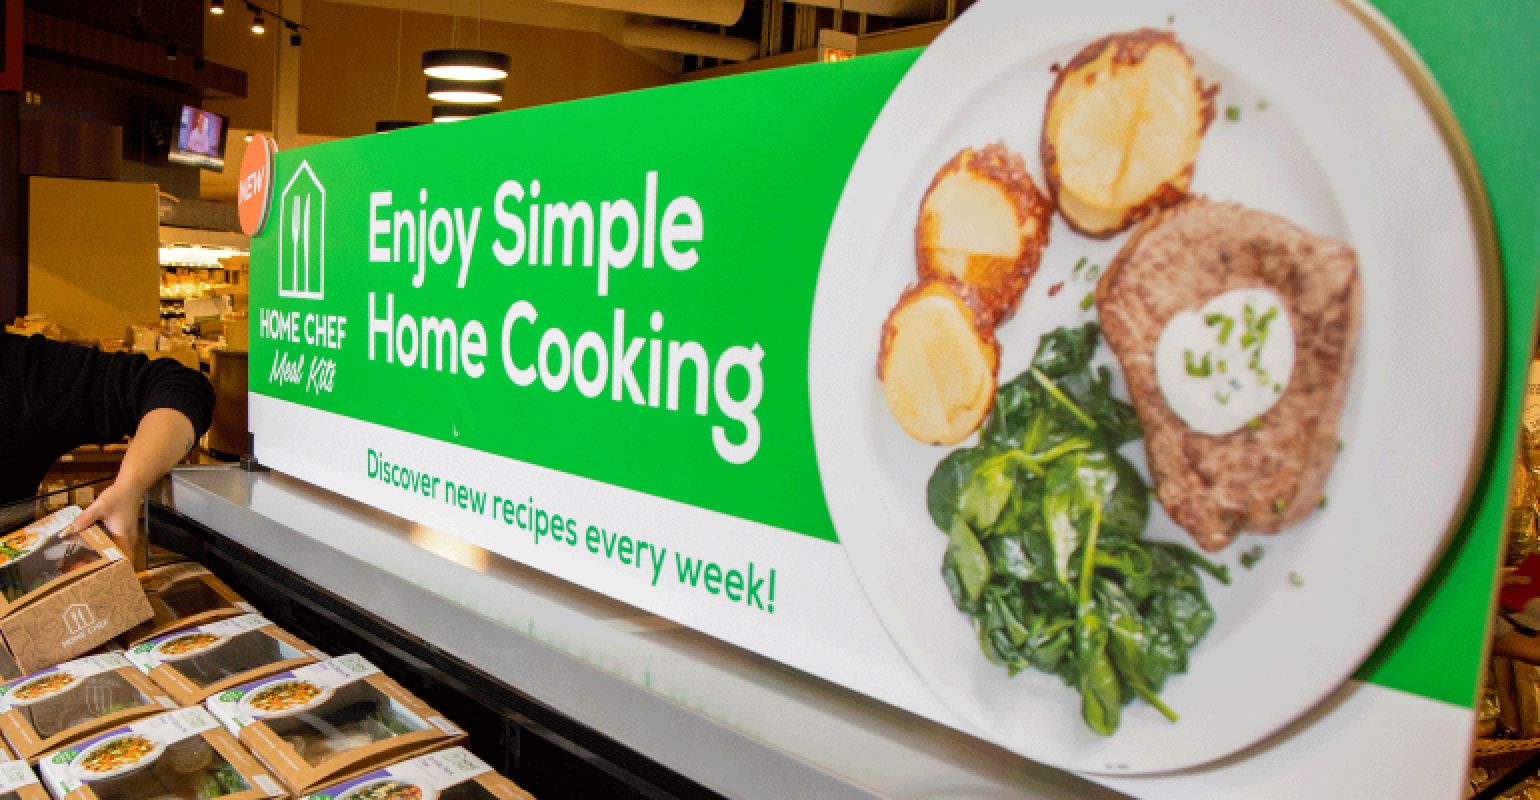 https://www.supermarketnews.com/sites/supermarketnews.com/files/styles/article_featured_retina/public/Link%20-%20Home_Chef_display_at_Kroger_store-promo_0.png?itok=TjidtKwc